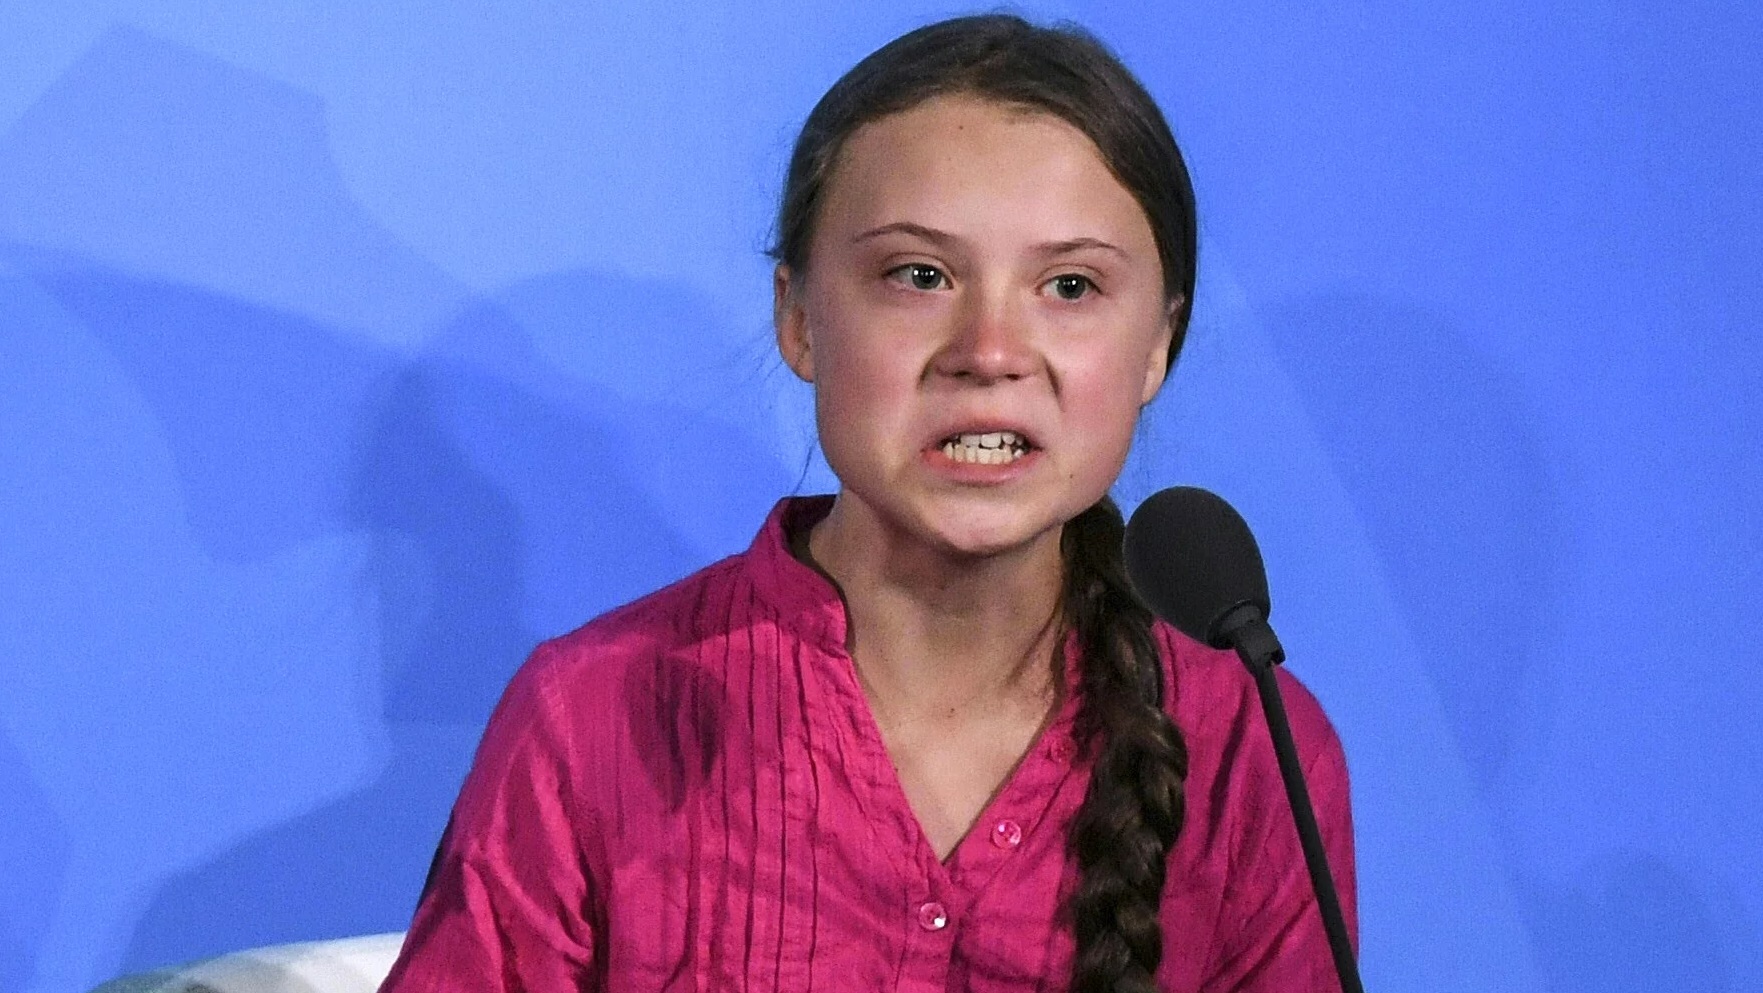 Train company to get dressing down from German authorities after embarrassing Greta Thunberg